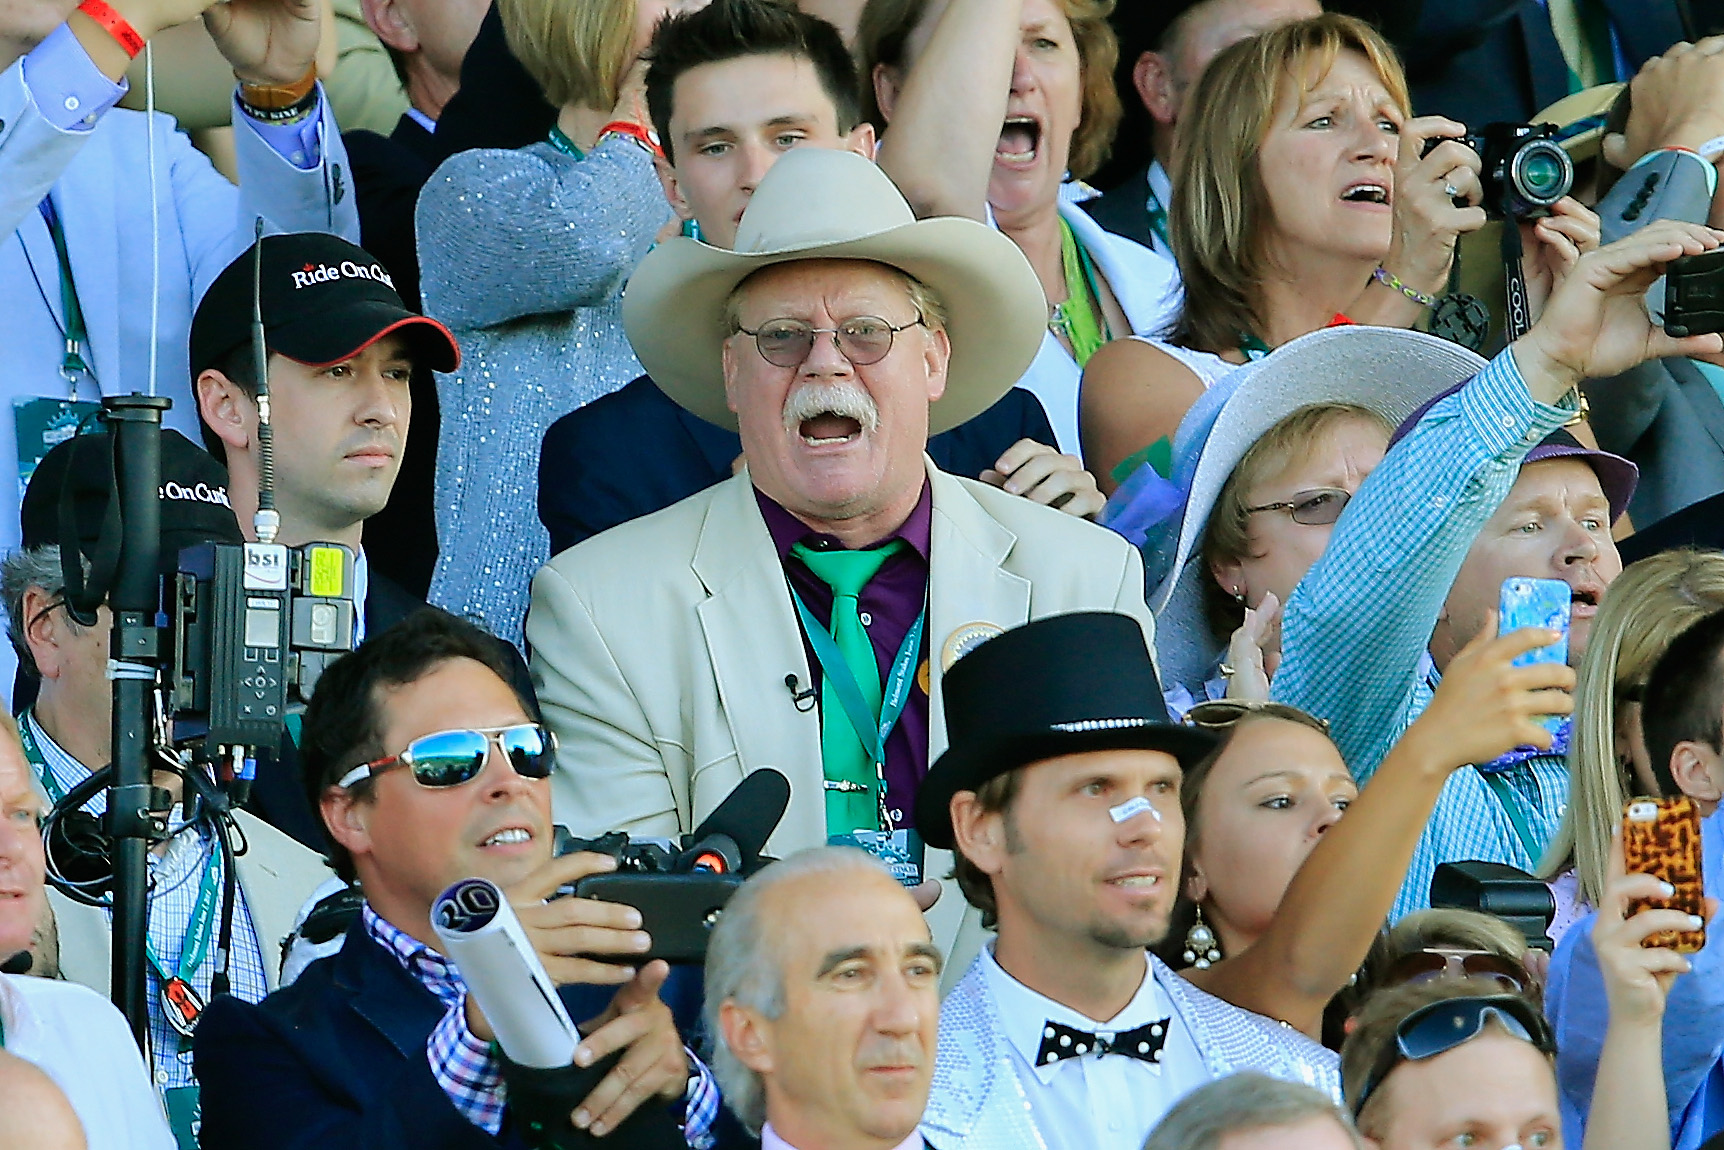 Steve Coburn, co-owner of California Chrome, not happy while watching the 146th running of the Belmont Stakes at Belmont Park on June 7, 2014 in Elmont, New York. (Rob Carr&mdash;Getty Images)